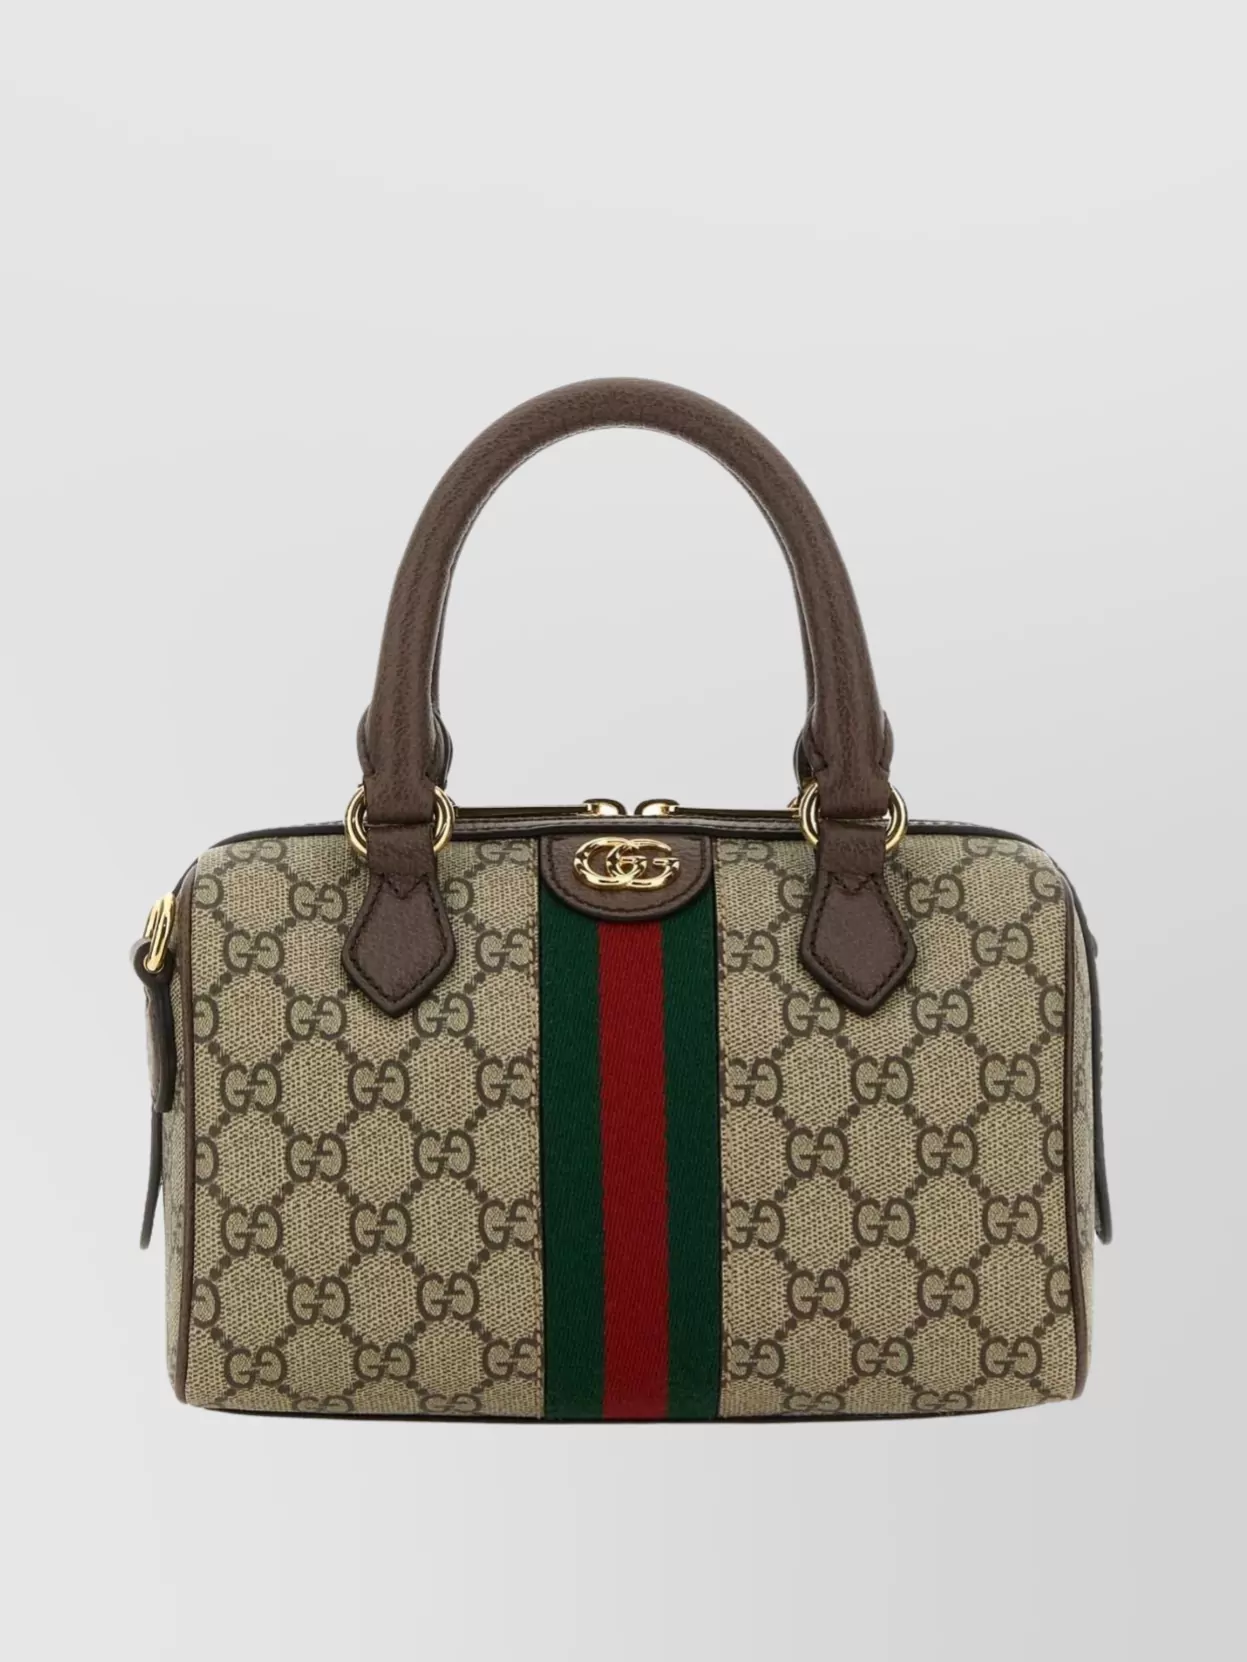 Gucci Mini Ophidia Gg Shoulder Bag In Brown